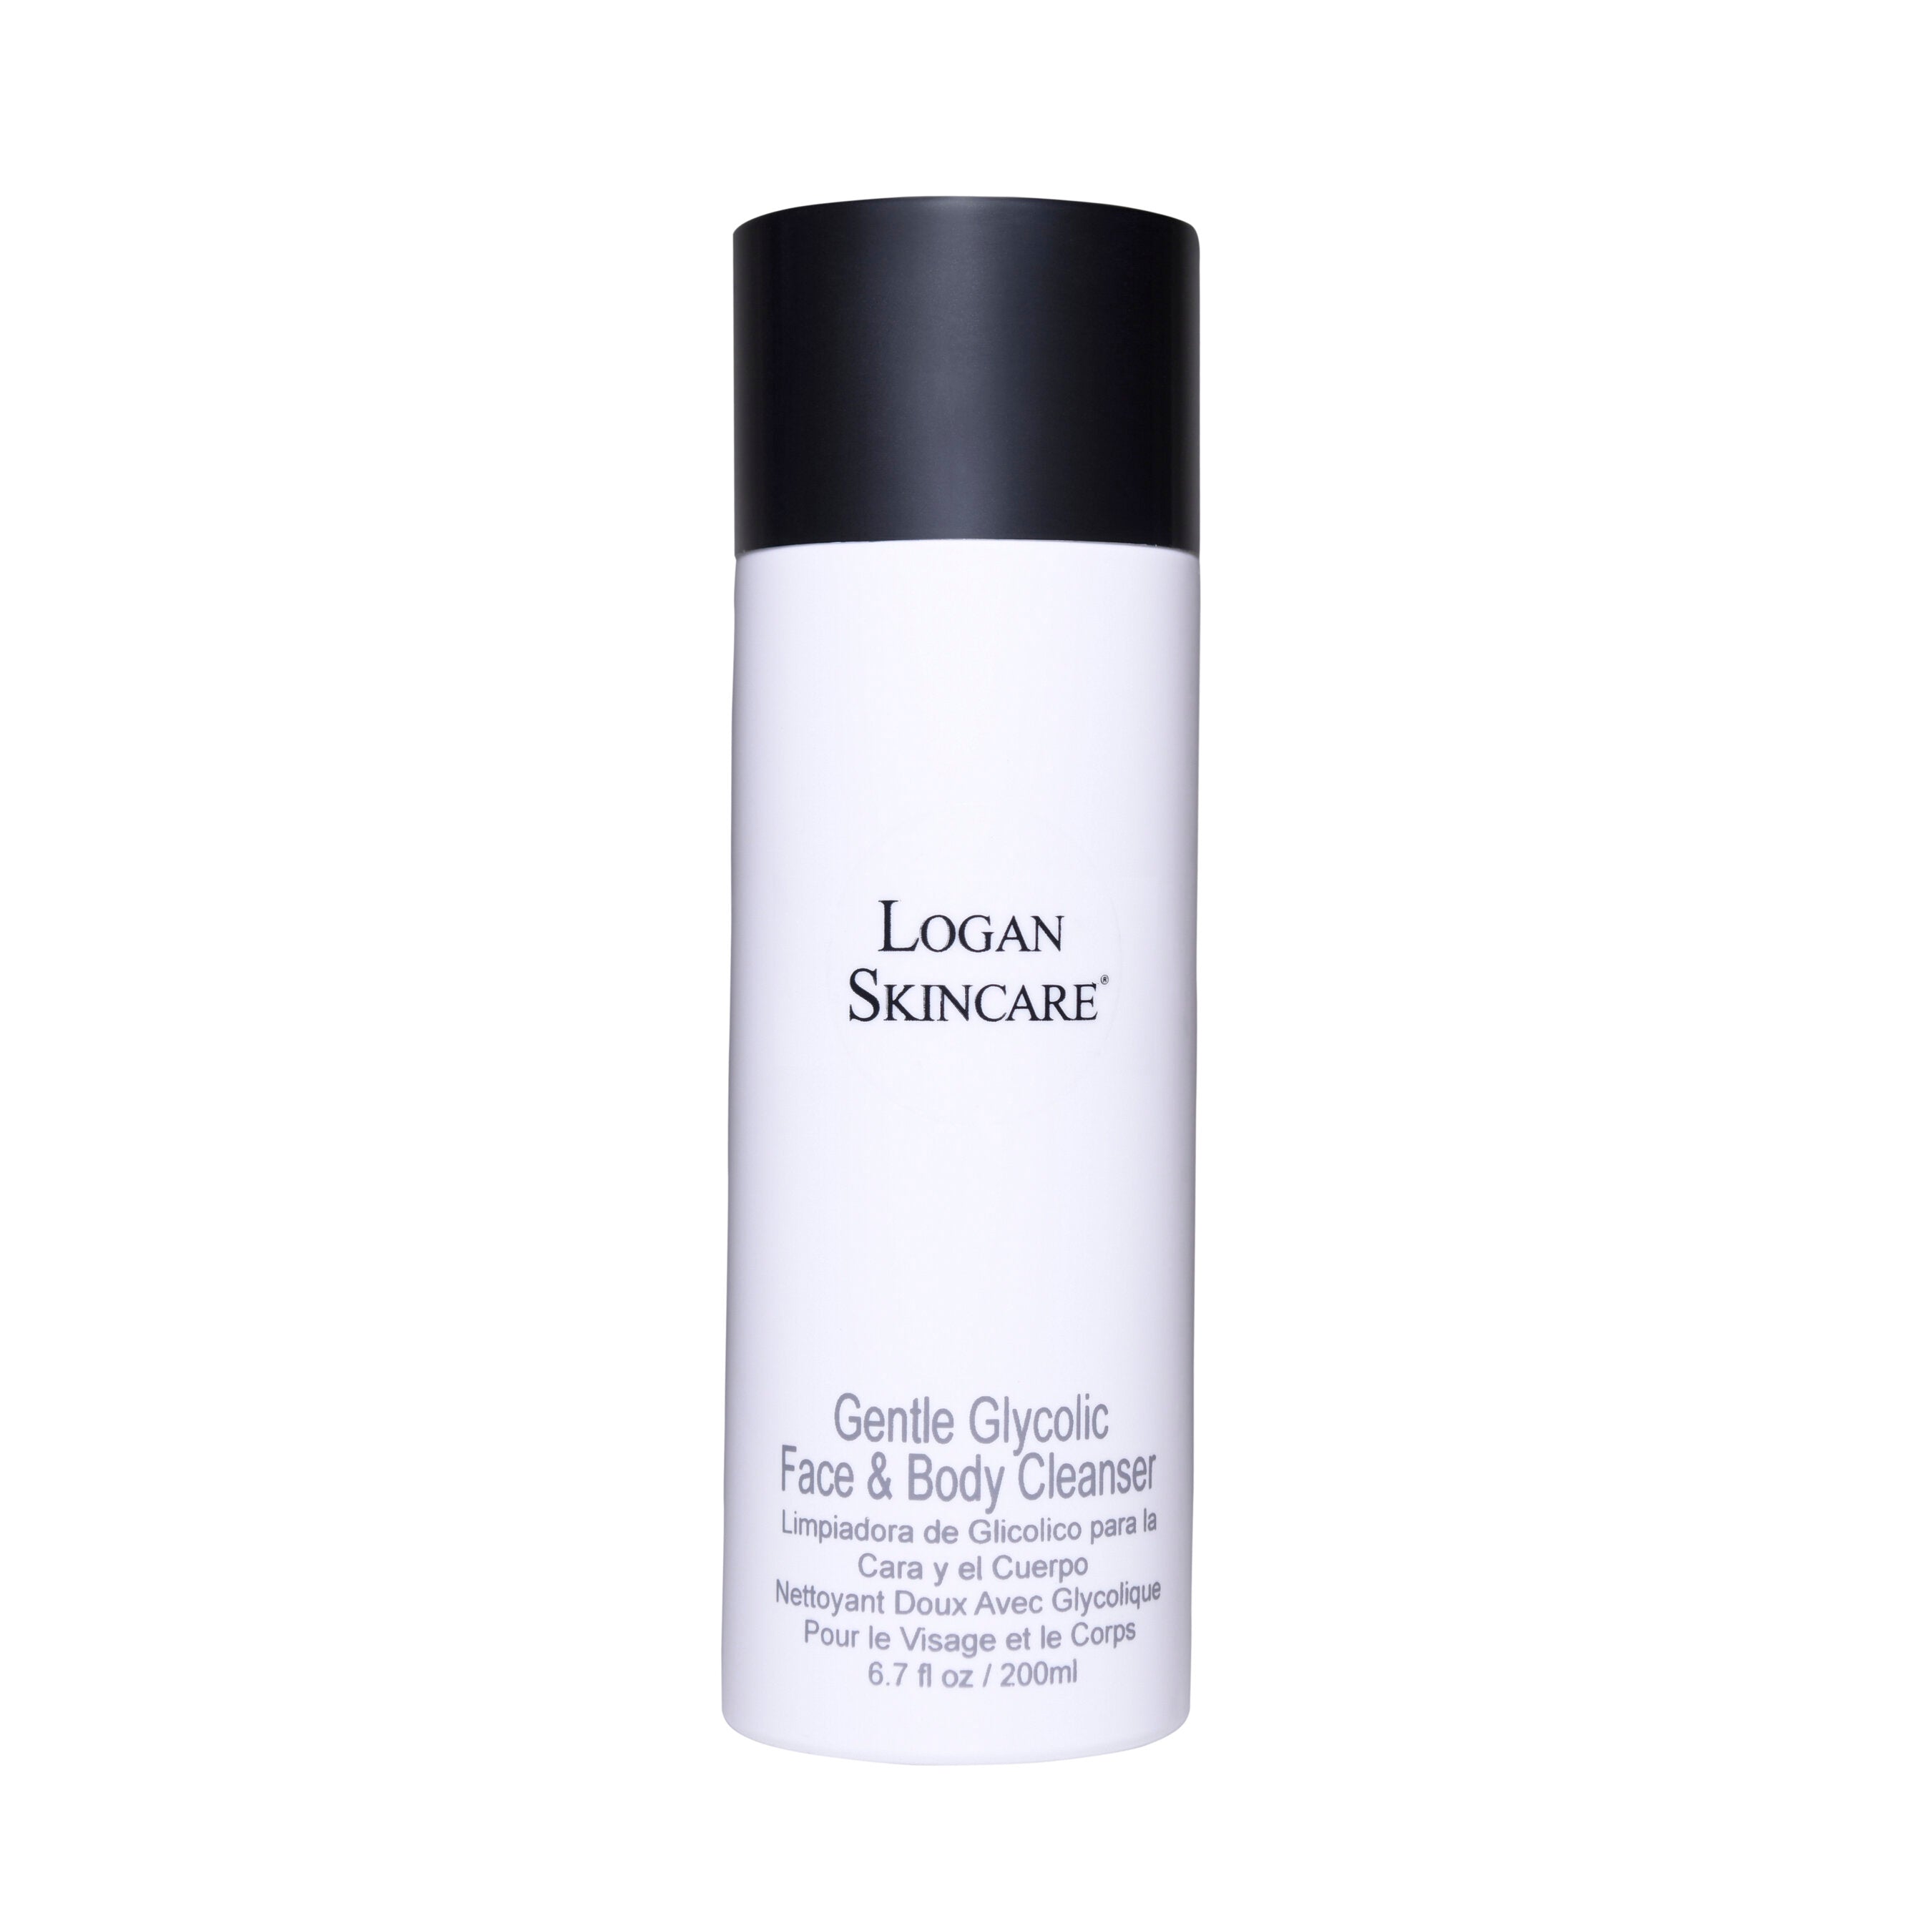 GENTLE GLYCOLIC FACE & BODY CLEANSER - Logan Skincare